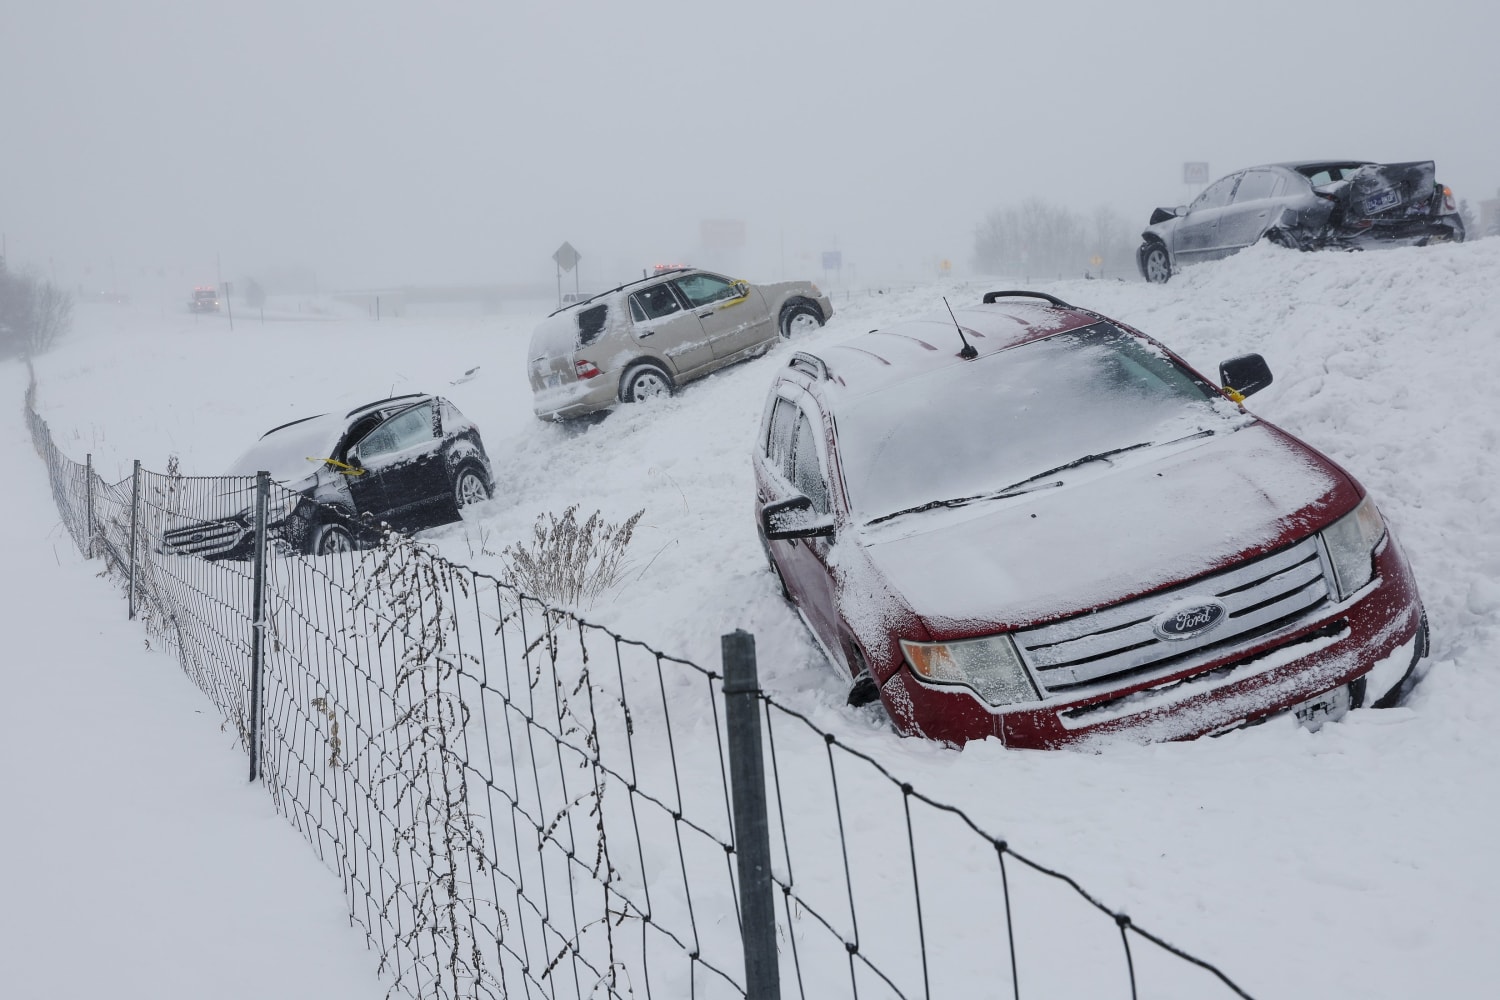 Buffalo NY snow storm death toll rises to 37 as National Guard